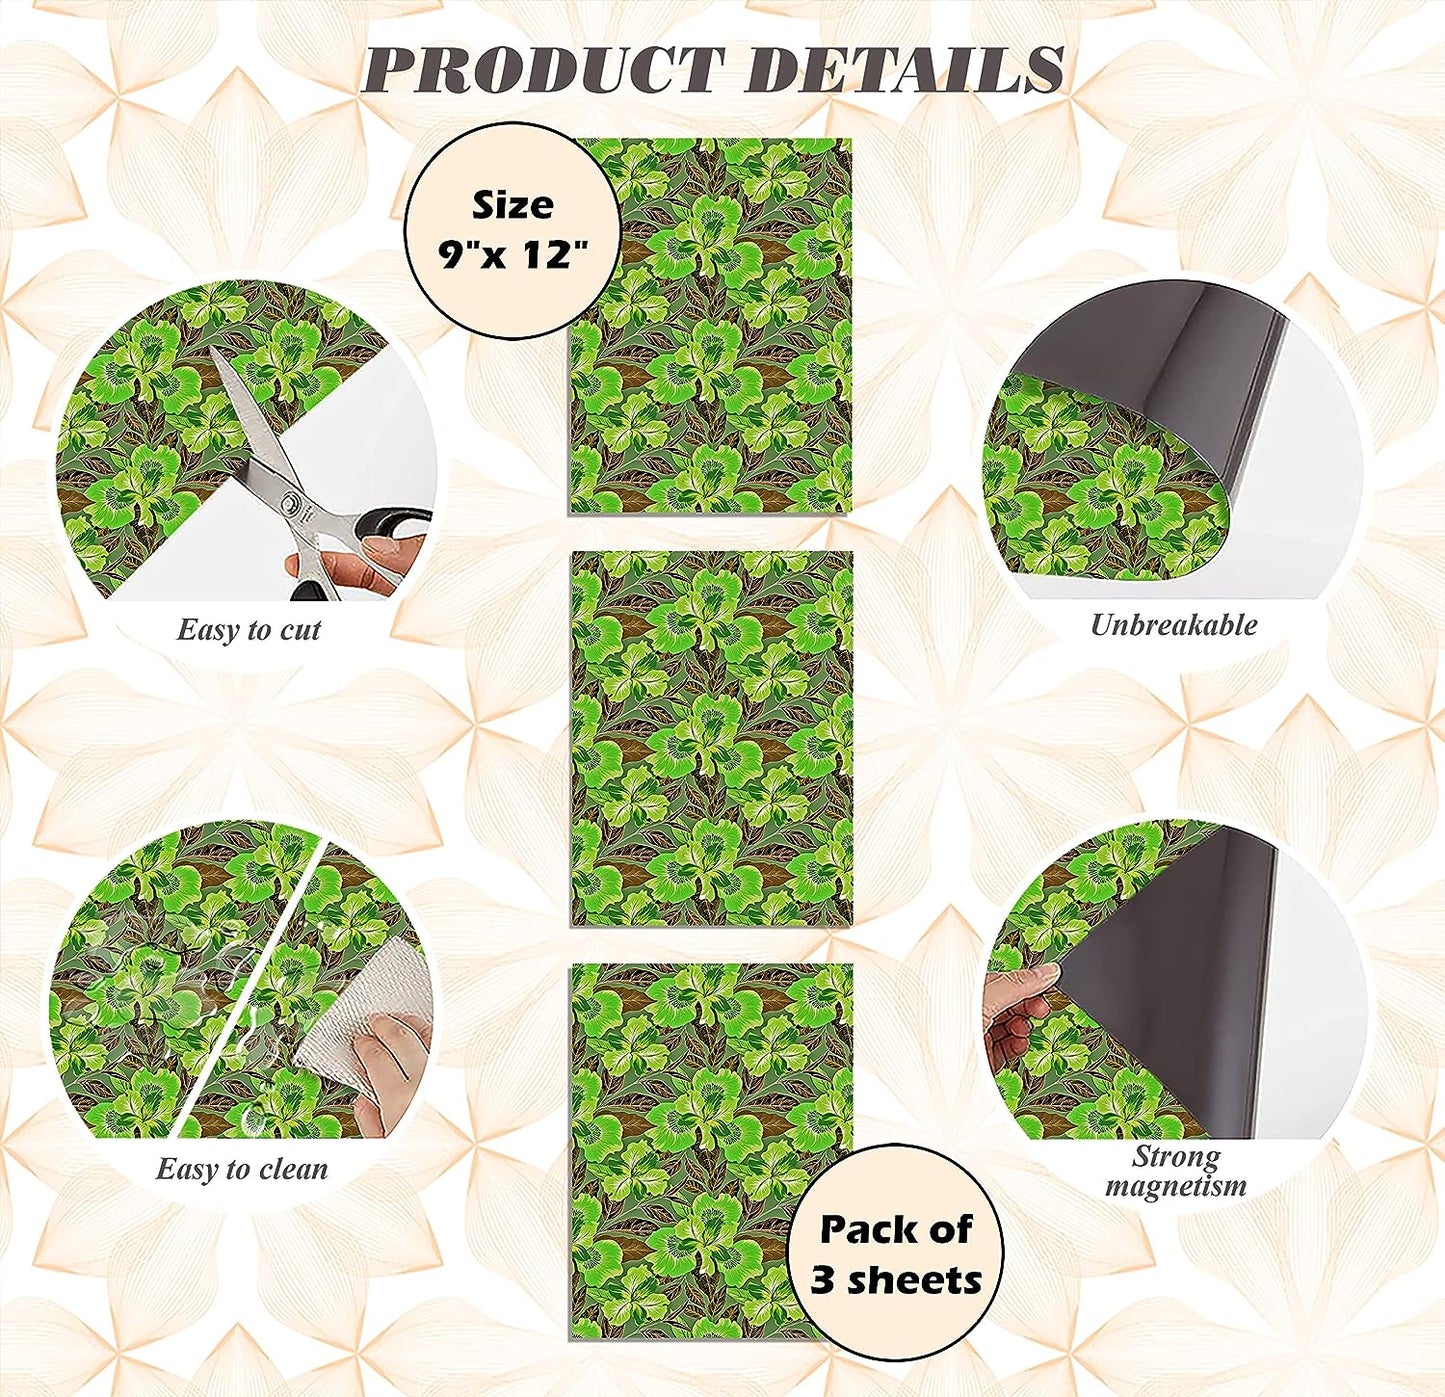 PELICAN INDUSTRIAL Magnetic Locker Wallpaper (Full Sheet Magnetic) - Remove & Reuse Decorative Vinyl - Made in USA - Fade, Tear and Water Resistant - (Tropical Leaves) - Pack of 3 Sheets (vb057b)